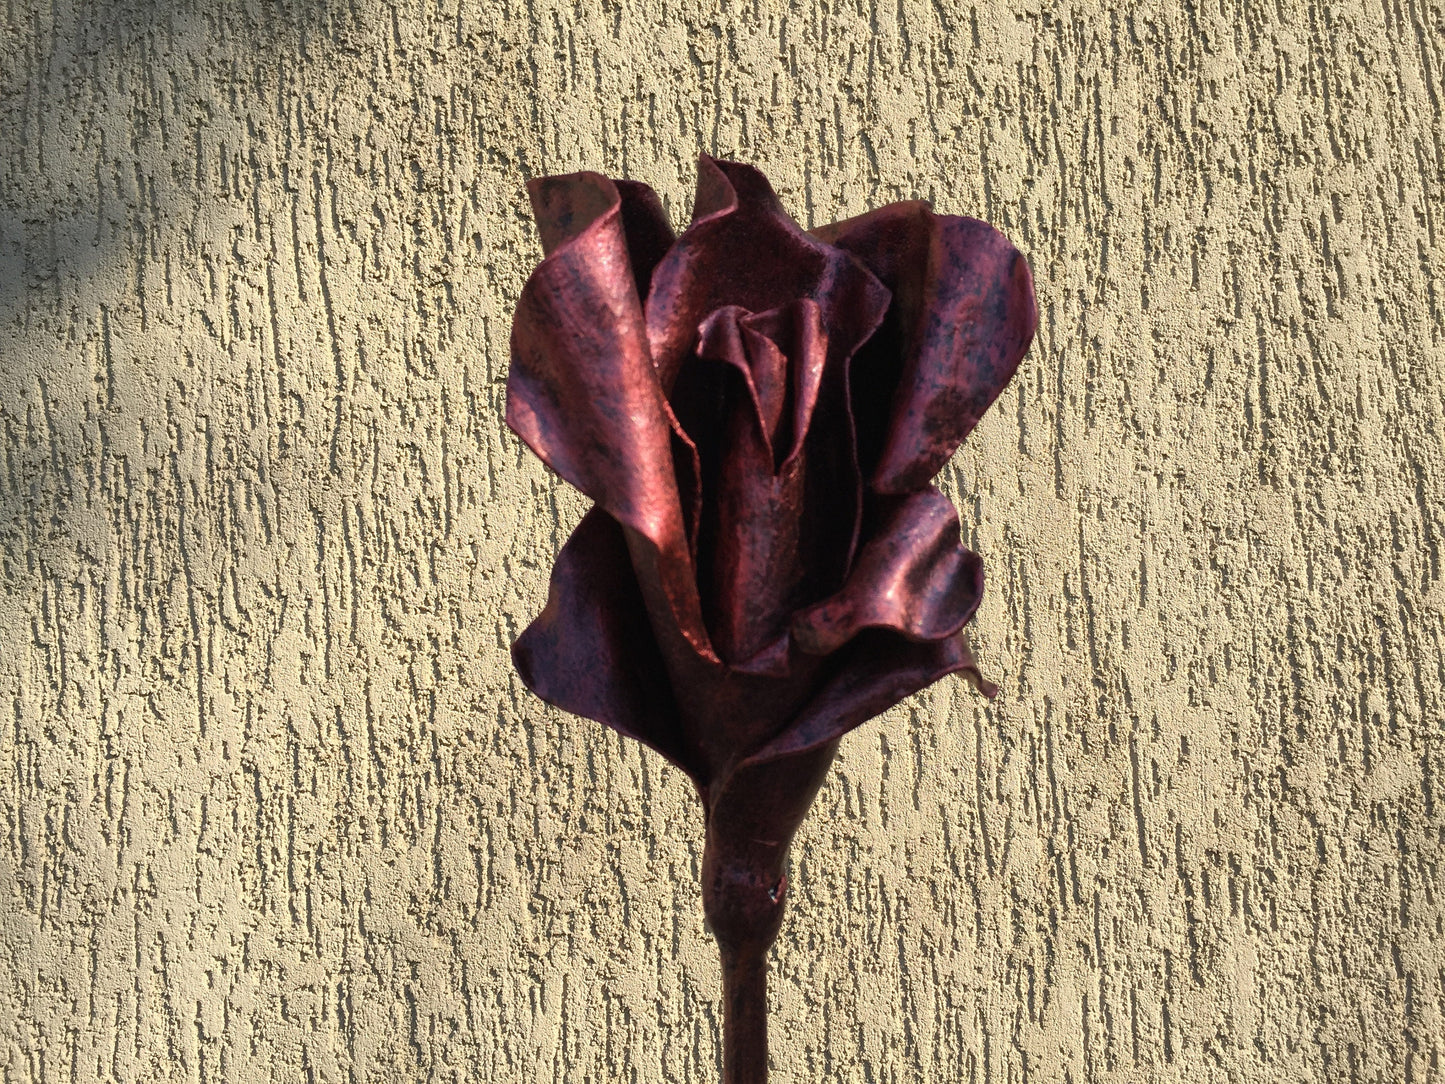 Metal rose, metal gift for her, wedding anniversary, 6th, 11th, Mother's day gift, birthday metal gift, iron rose, steel rose, metal bouquet